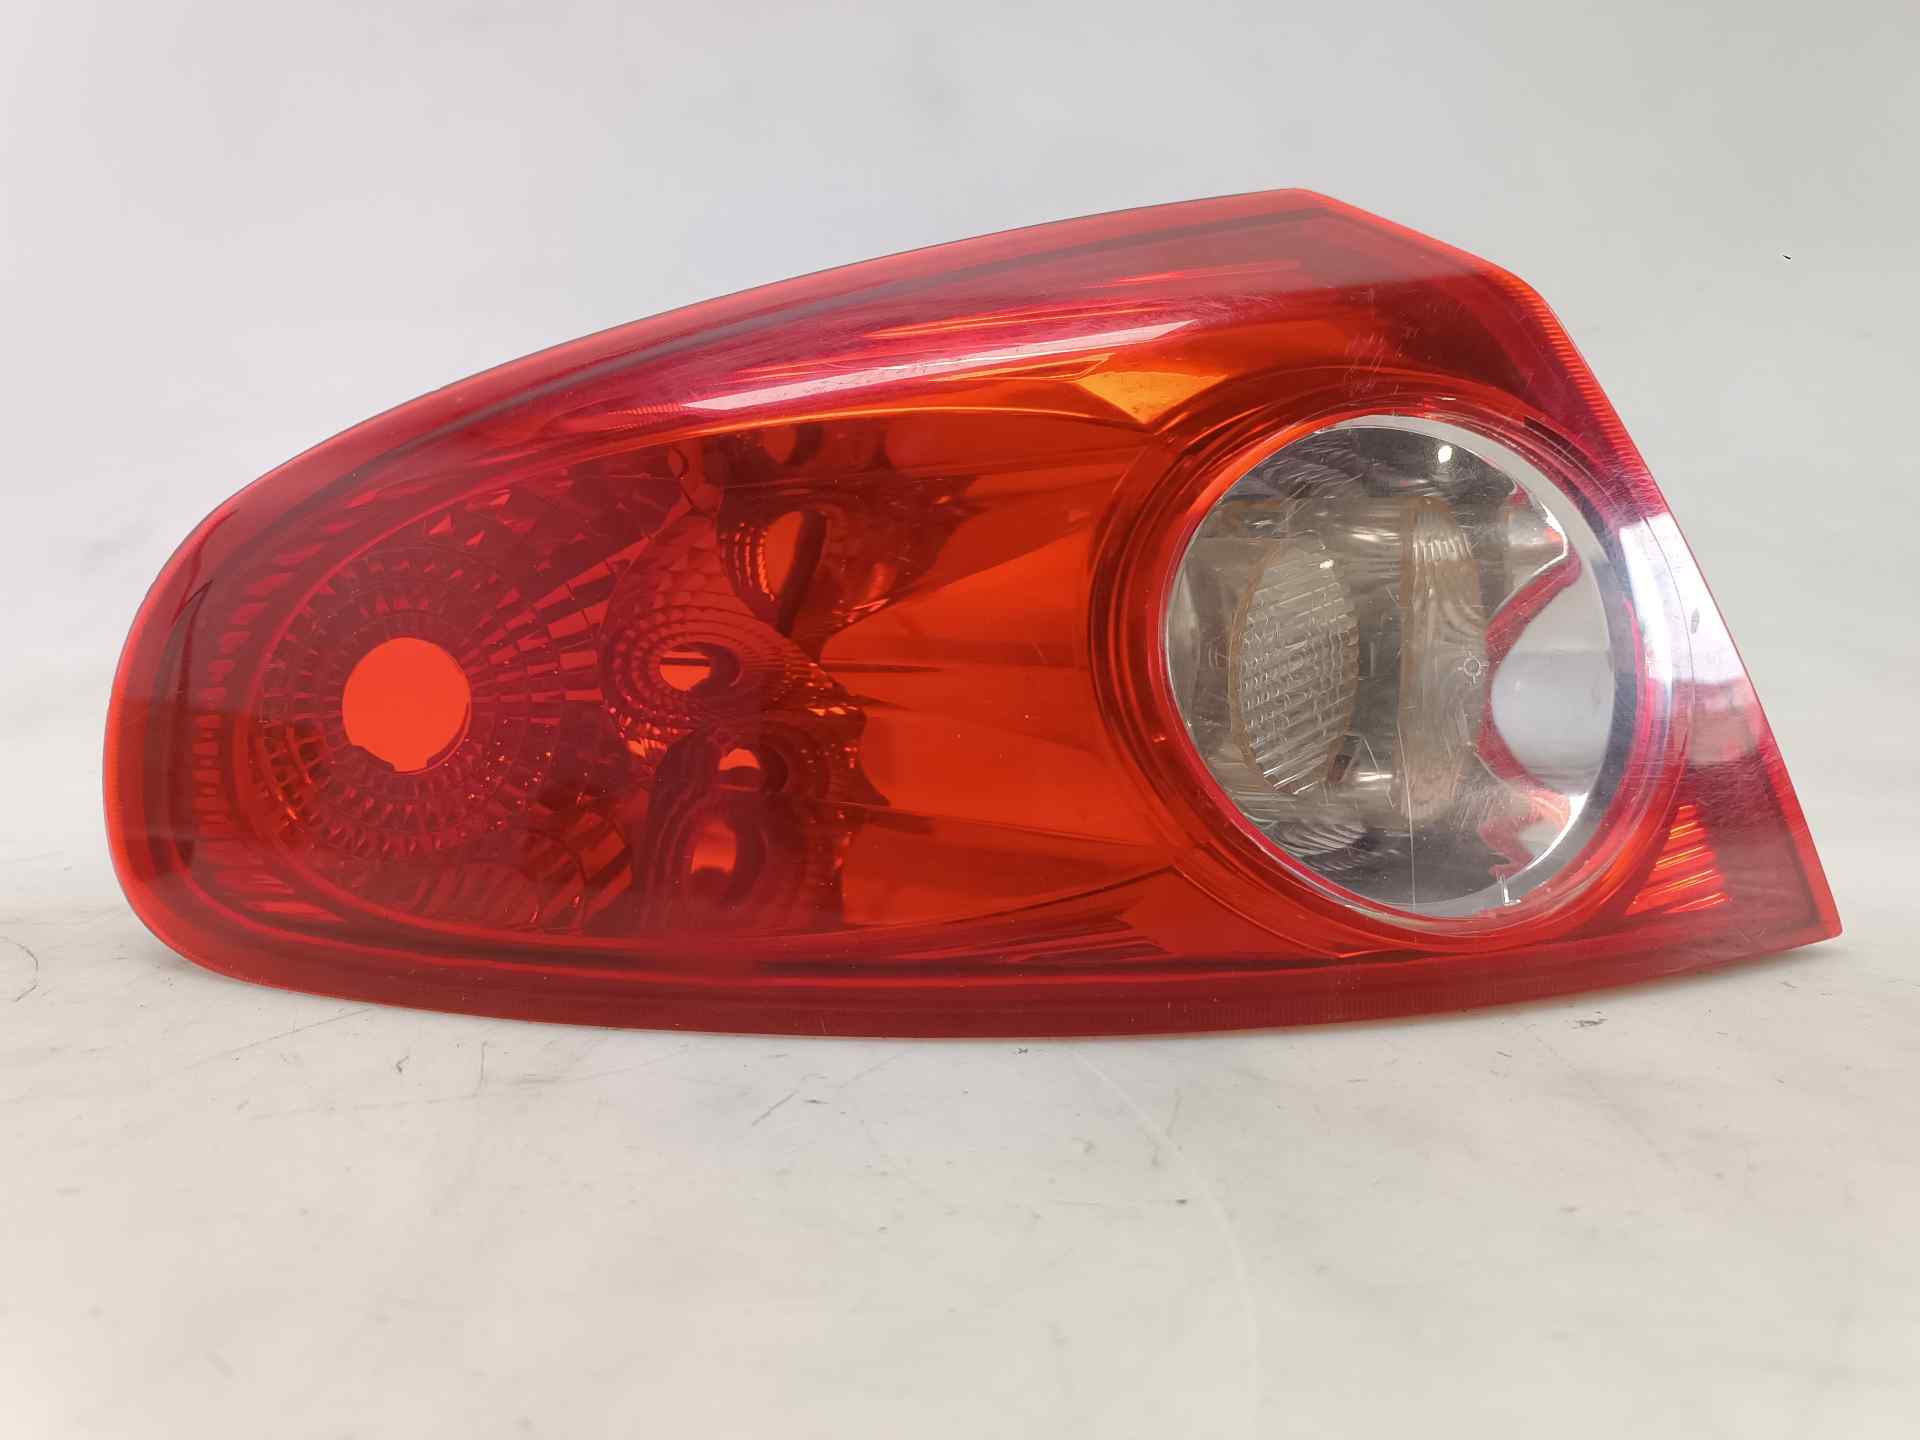 DAEWOO Lacetti 1 generation (2002-2020) Rear Left Taillight 875110, 875110, 4A27D 24584498